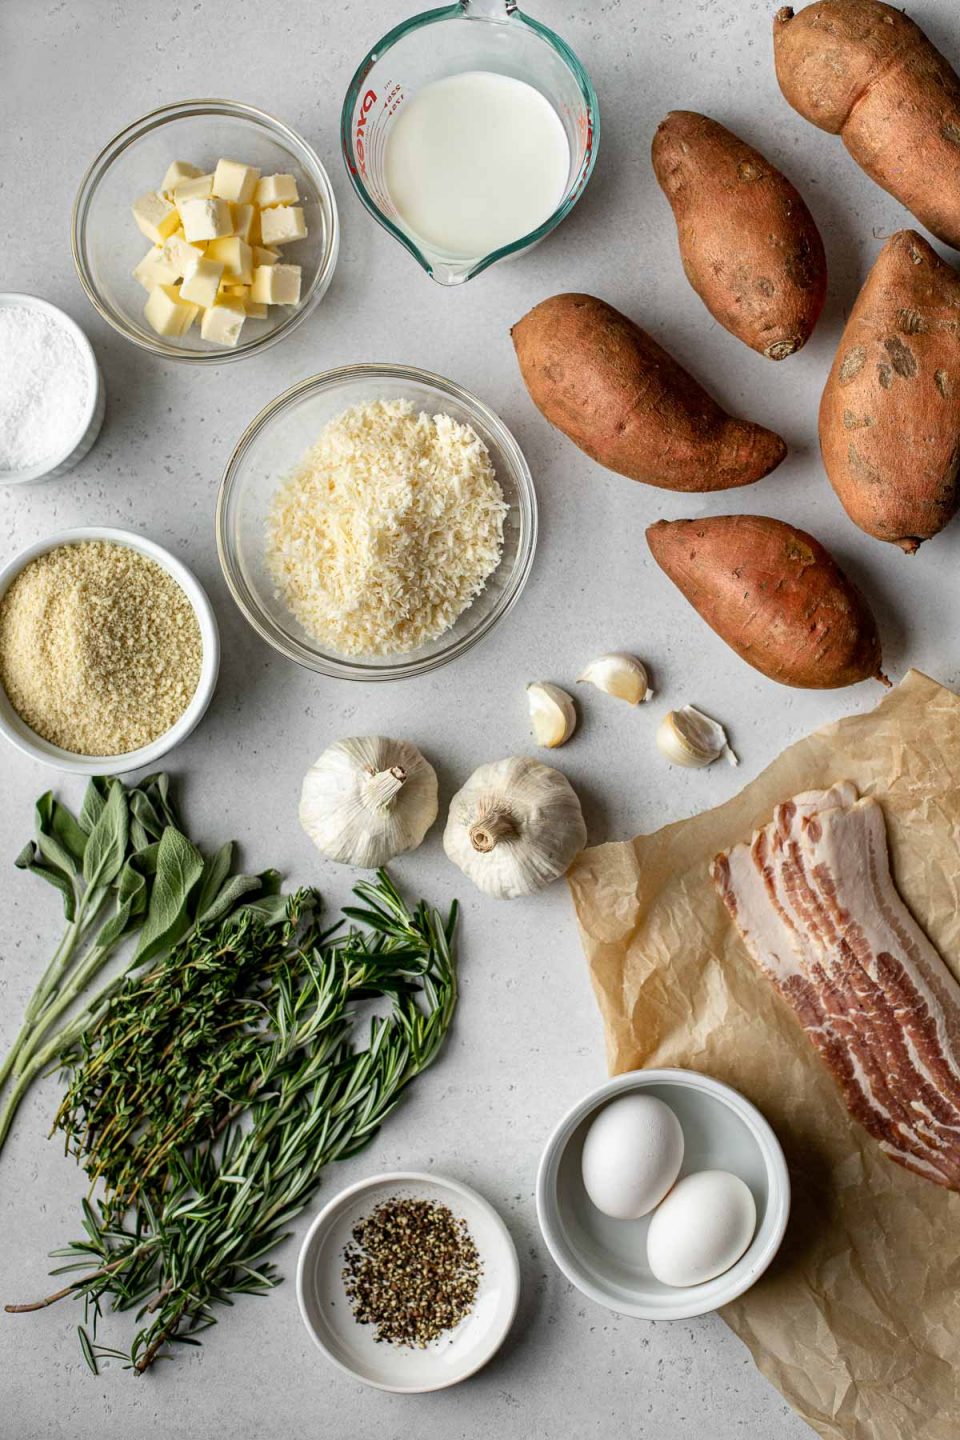 Savory Sweet Potato Casserole ingredients arranged on a creamy white textured surface: sweet potatoes, garlic, unsalted butter, whole milk, grated parmesan, eggs, kosher salt, ground black pepper, bacon, fresh herbs - rosemary, sage, thyme, panko breadcrumbs.